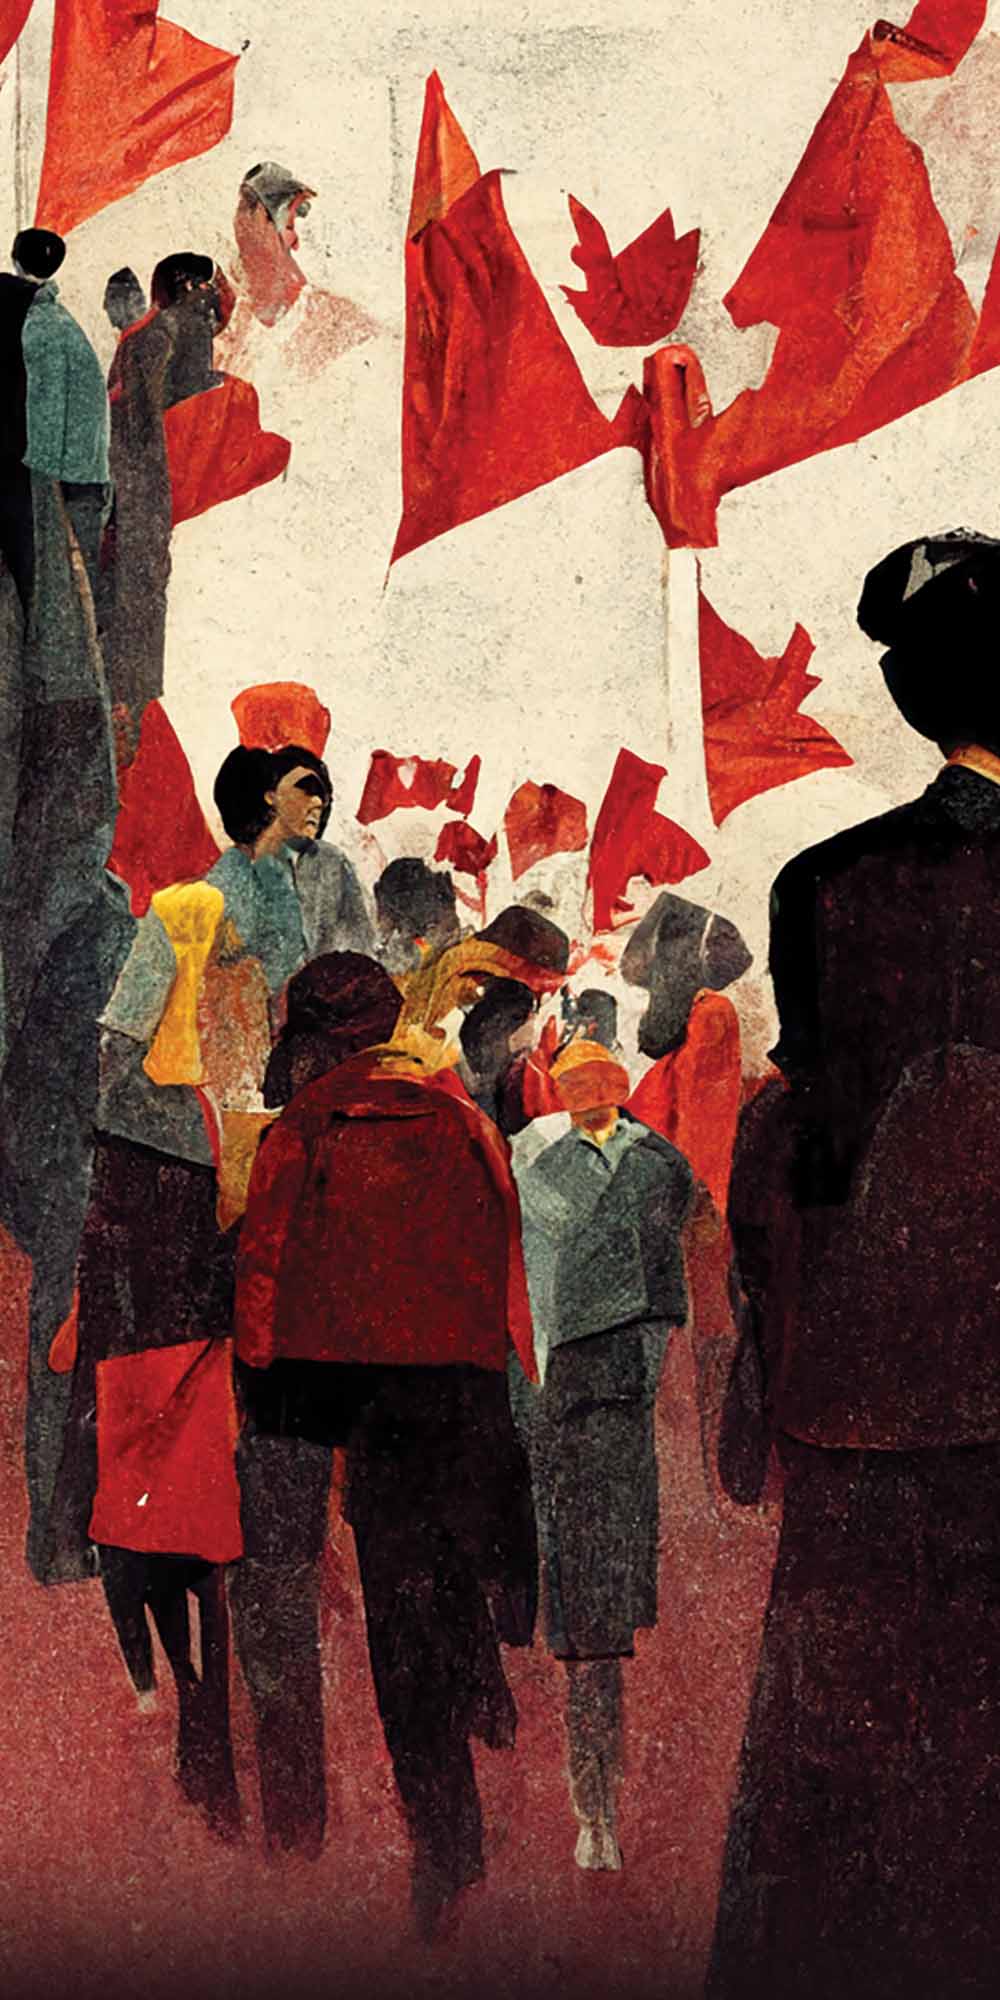 Illustration of a crowd of people waving Canadian flags. Prompts: a crowd of people, waving canadian flag, propaganda, illustration.